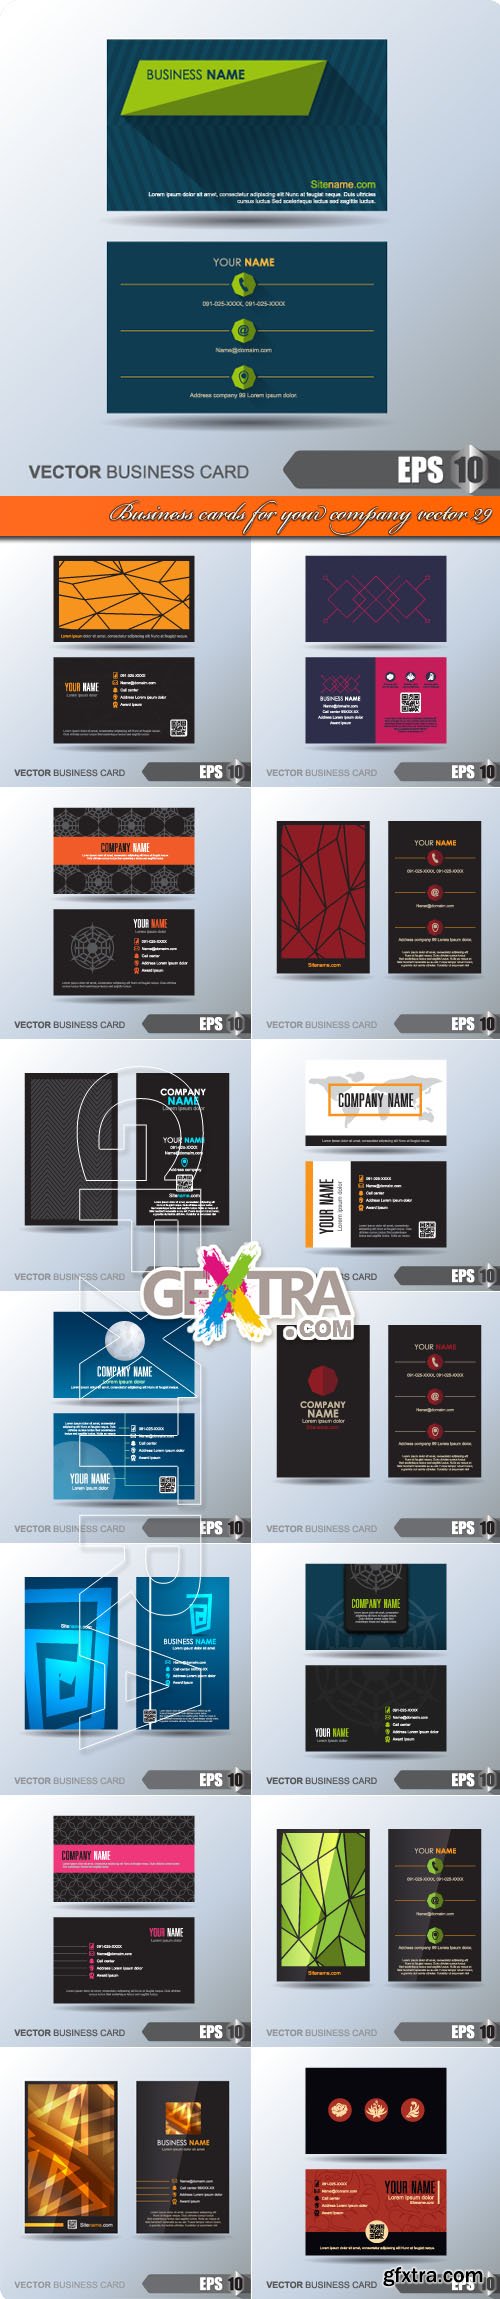 Business cards for your company vector 29